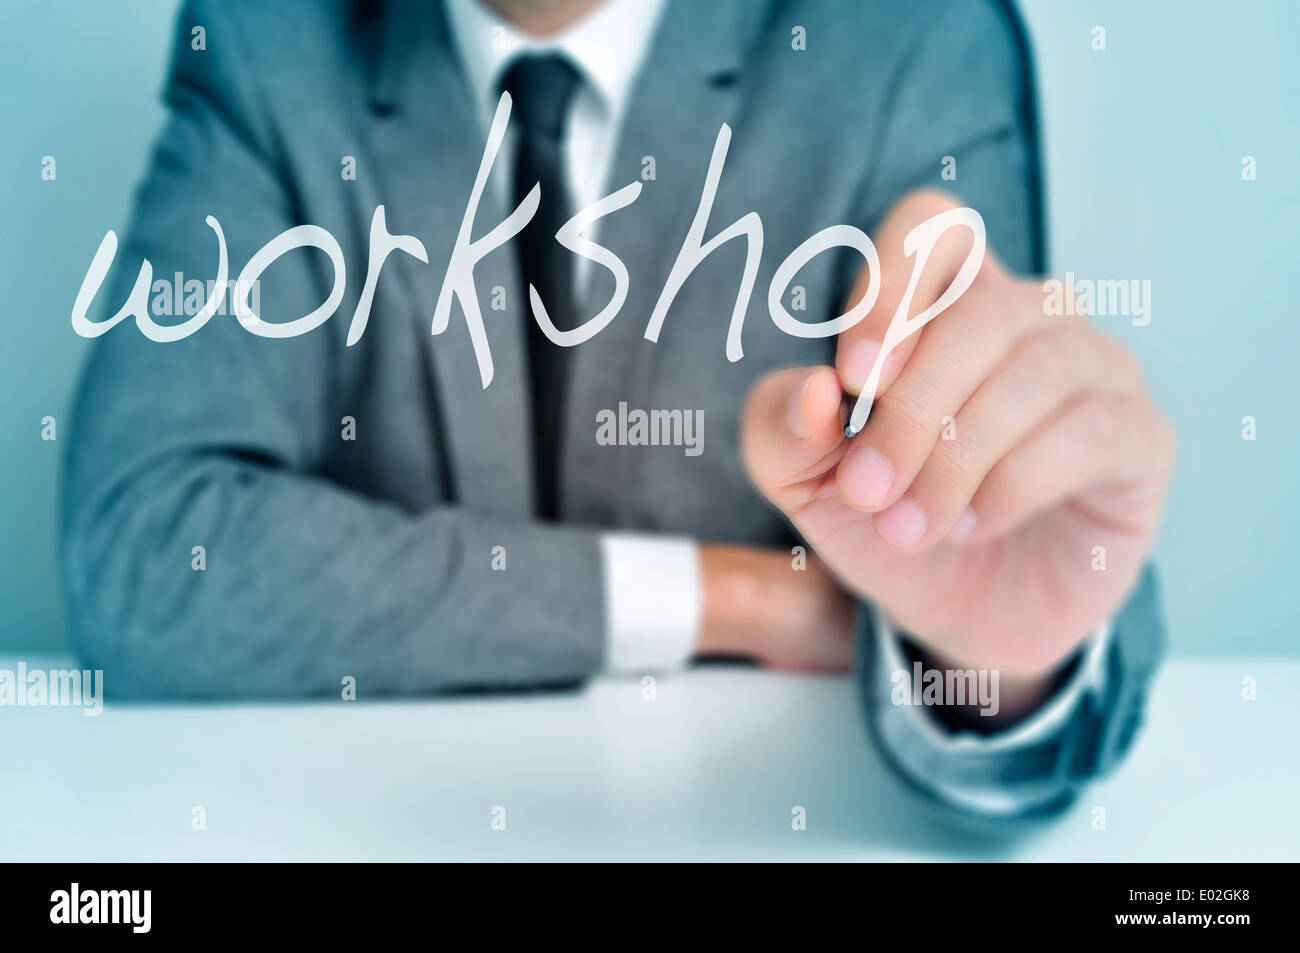 man wearing sitting in a desk writing the word workshop in the foreground Stock Photo